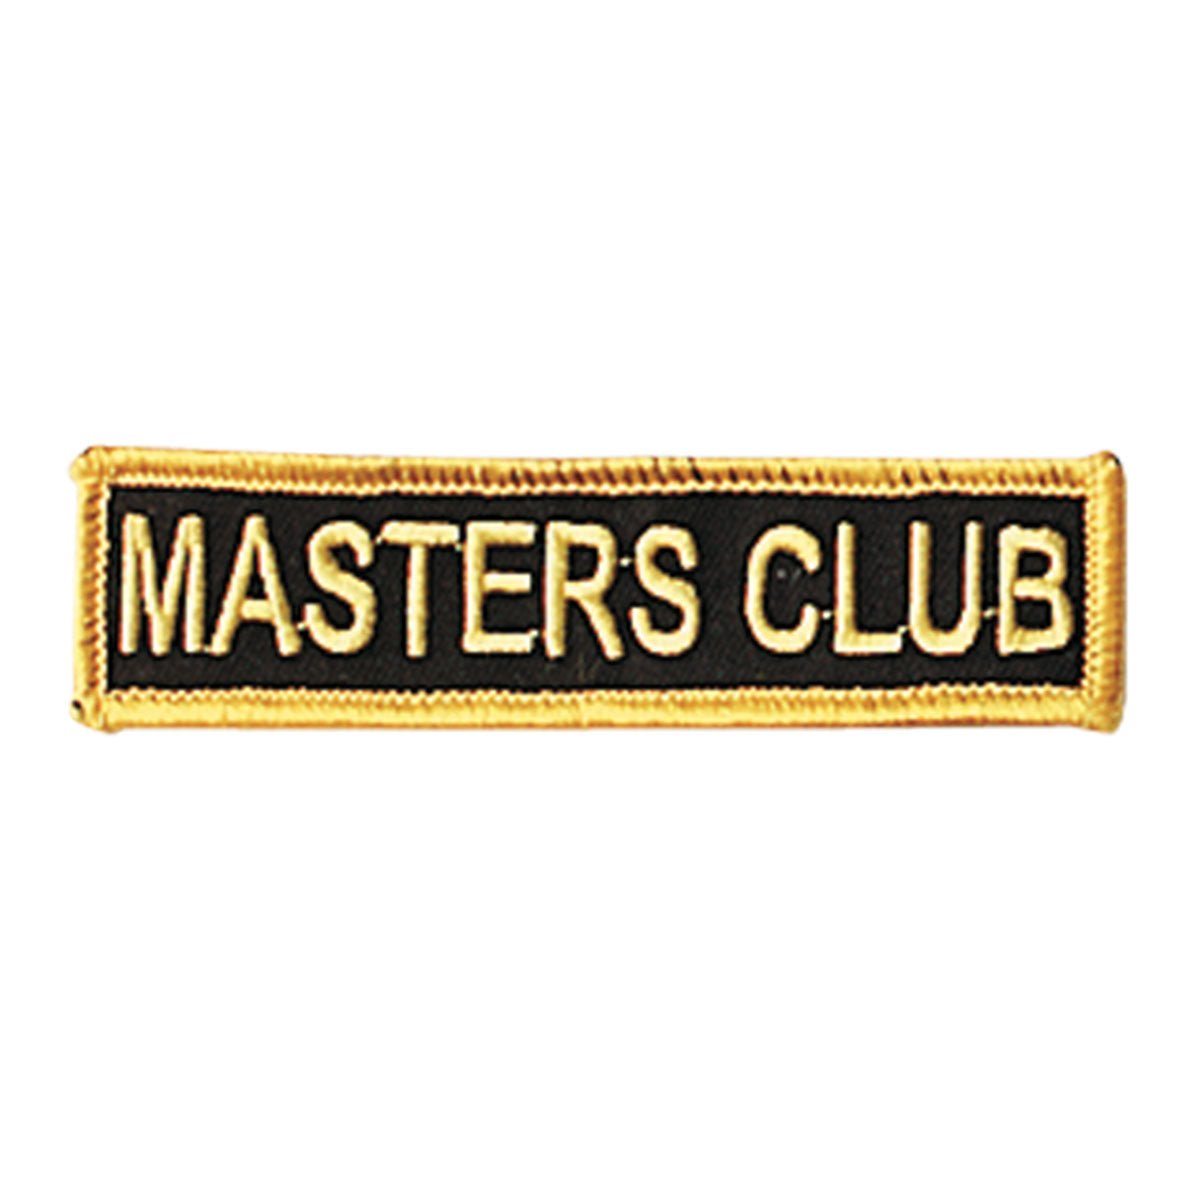 Black/Gold Masters Club Patch